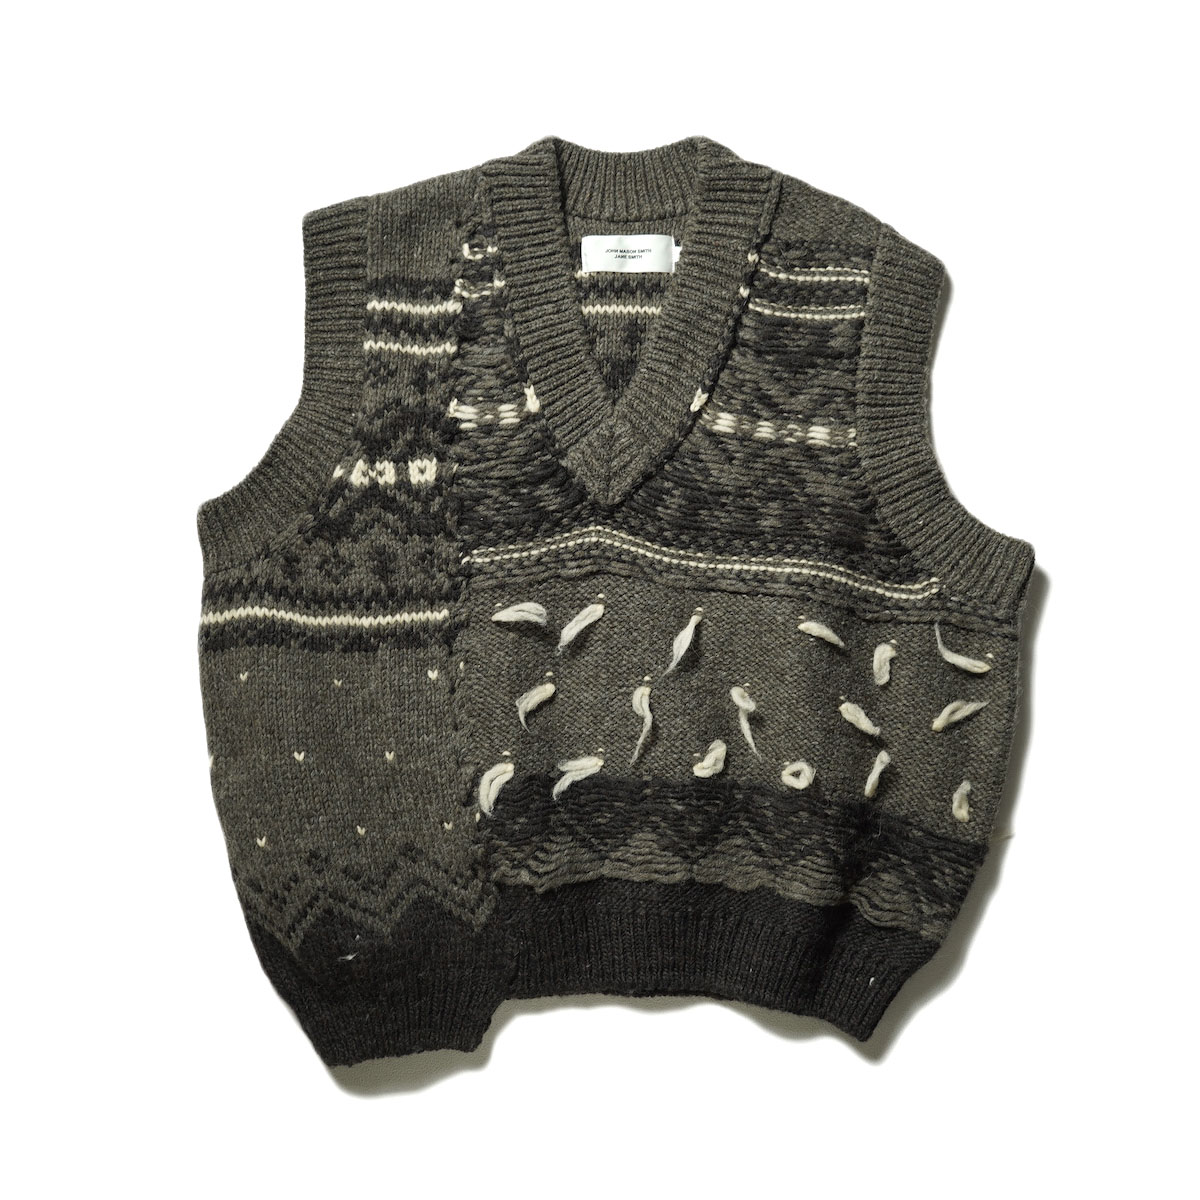 JANE SMITH / 3G OVERSIZED CANADIAN SWEATER VEST (Brown)